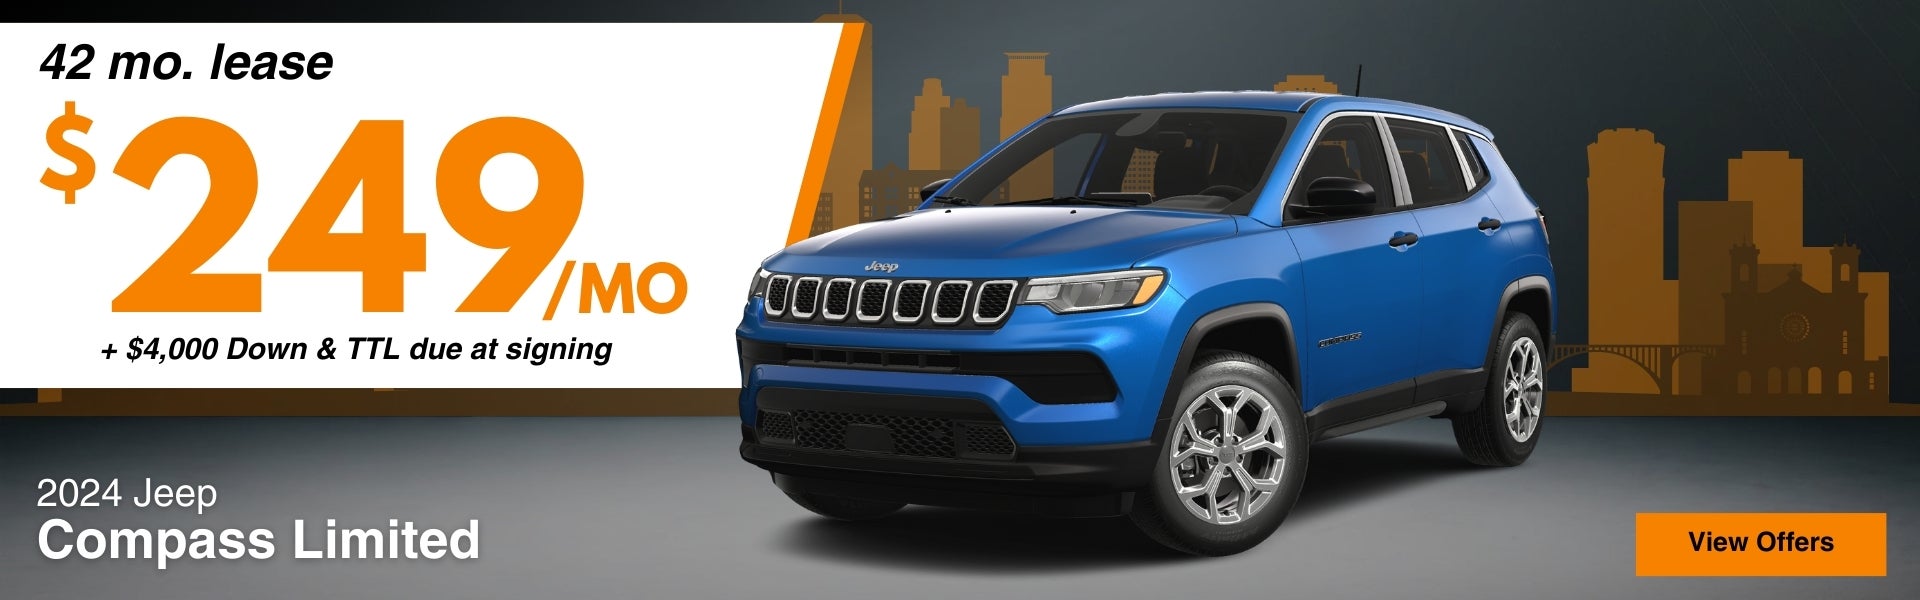 2024 Jeep Compass Lease Offer